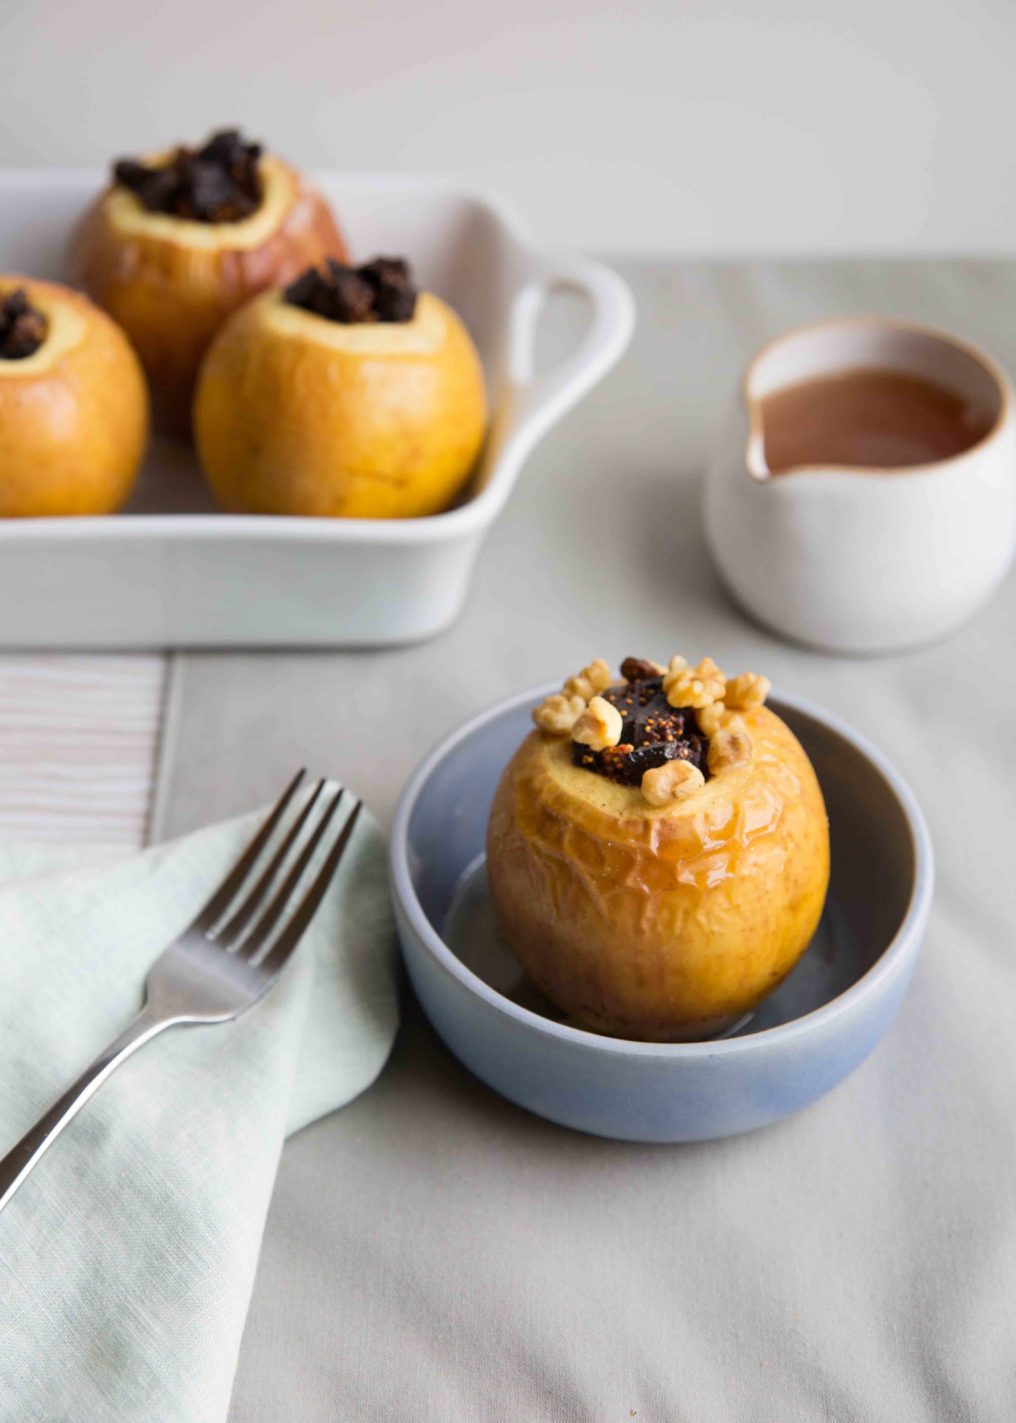 cider baked apples with figs